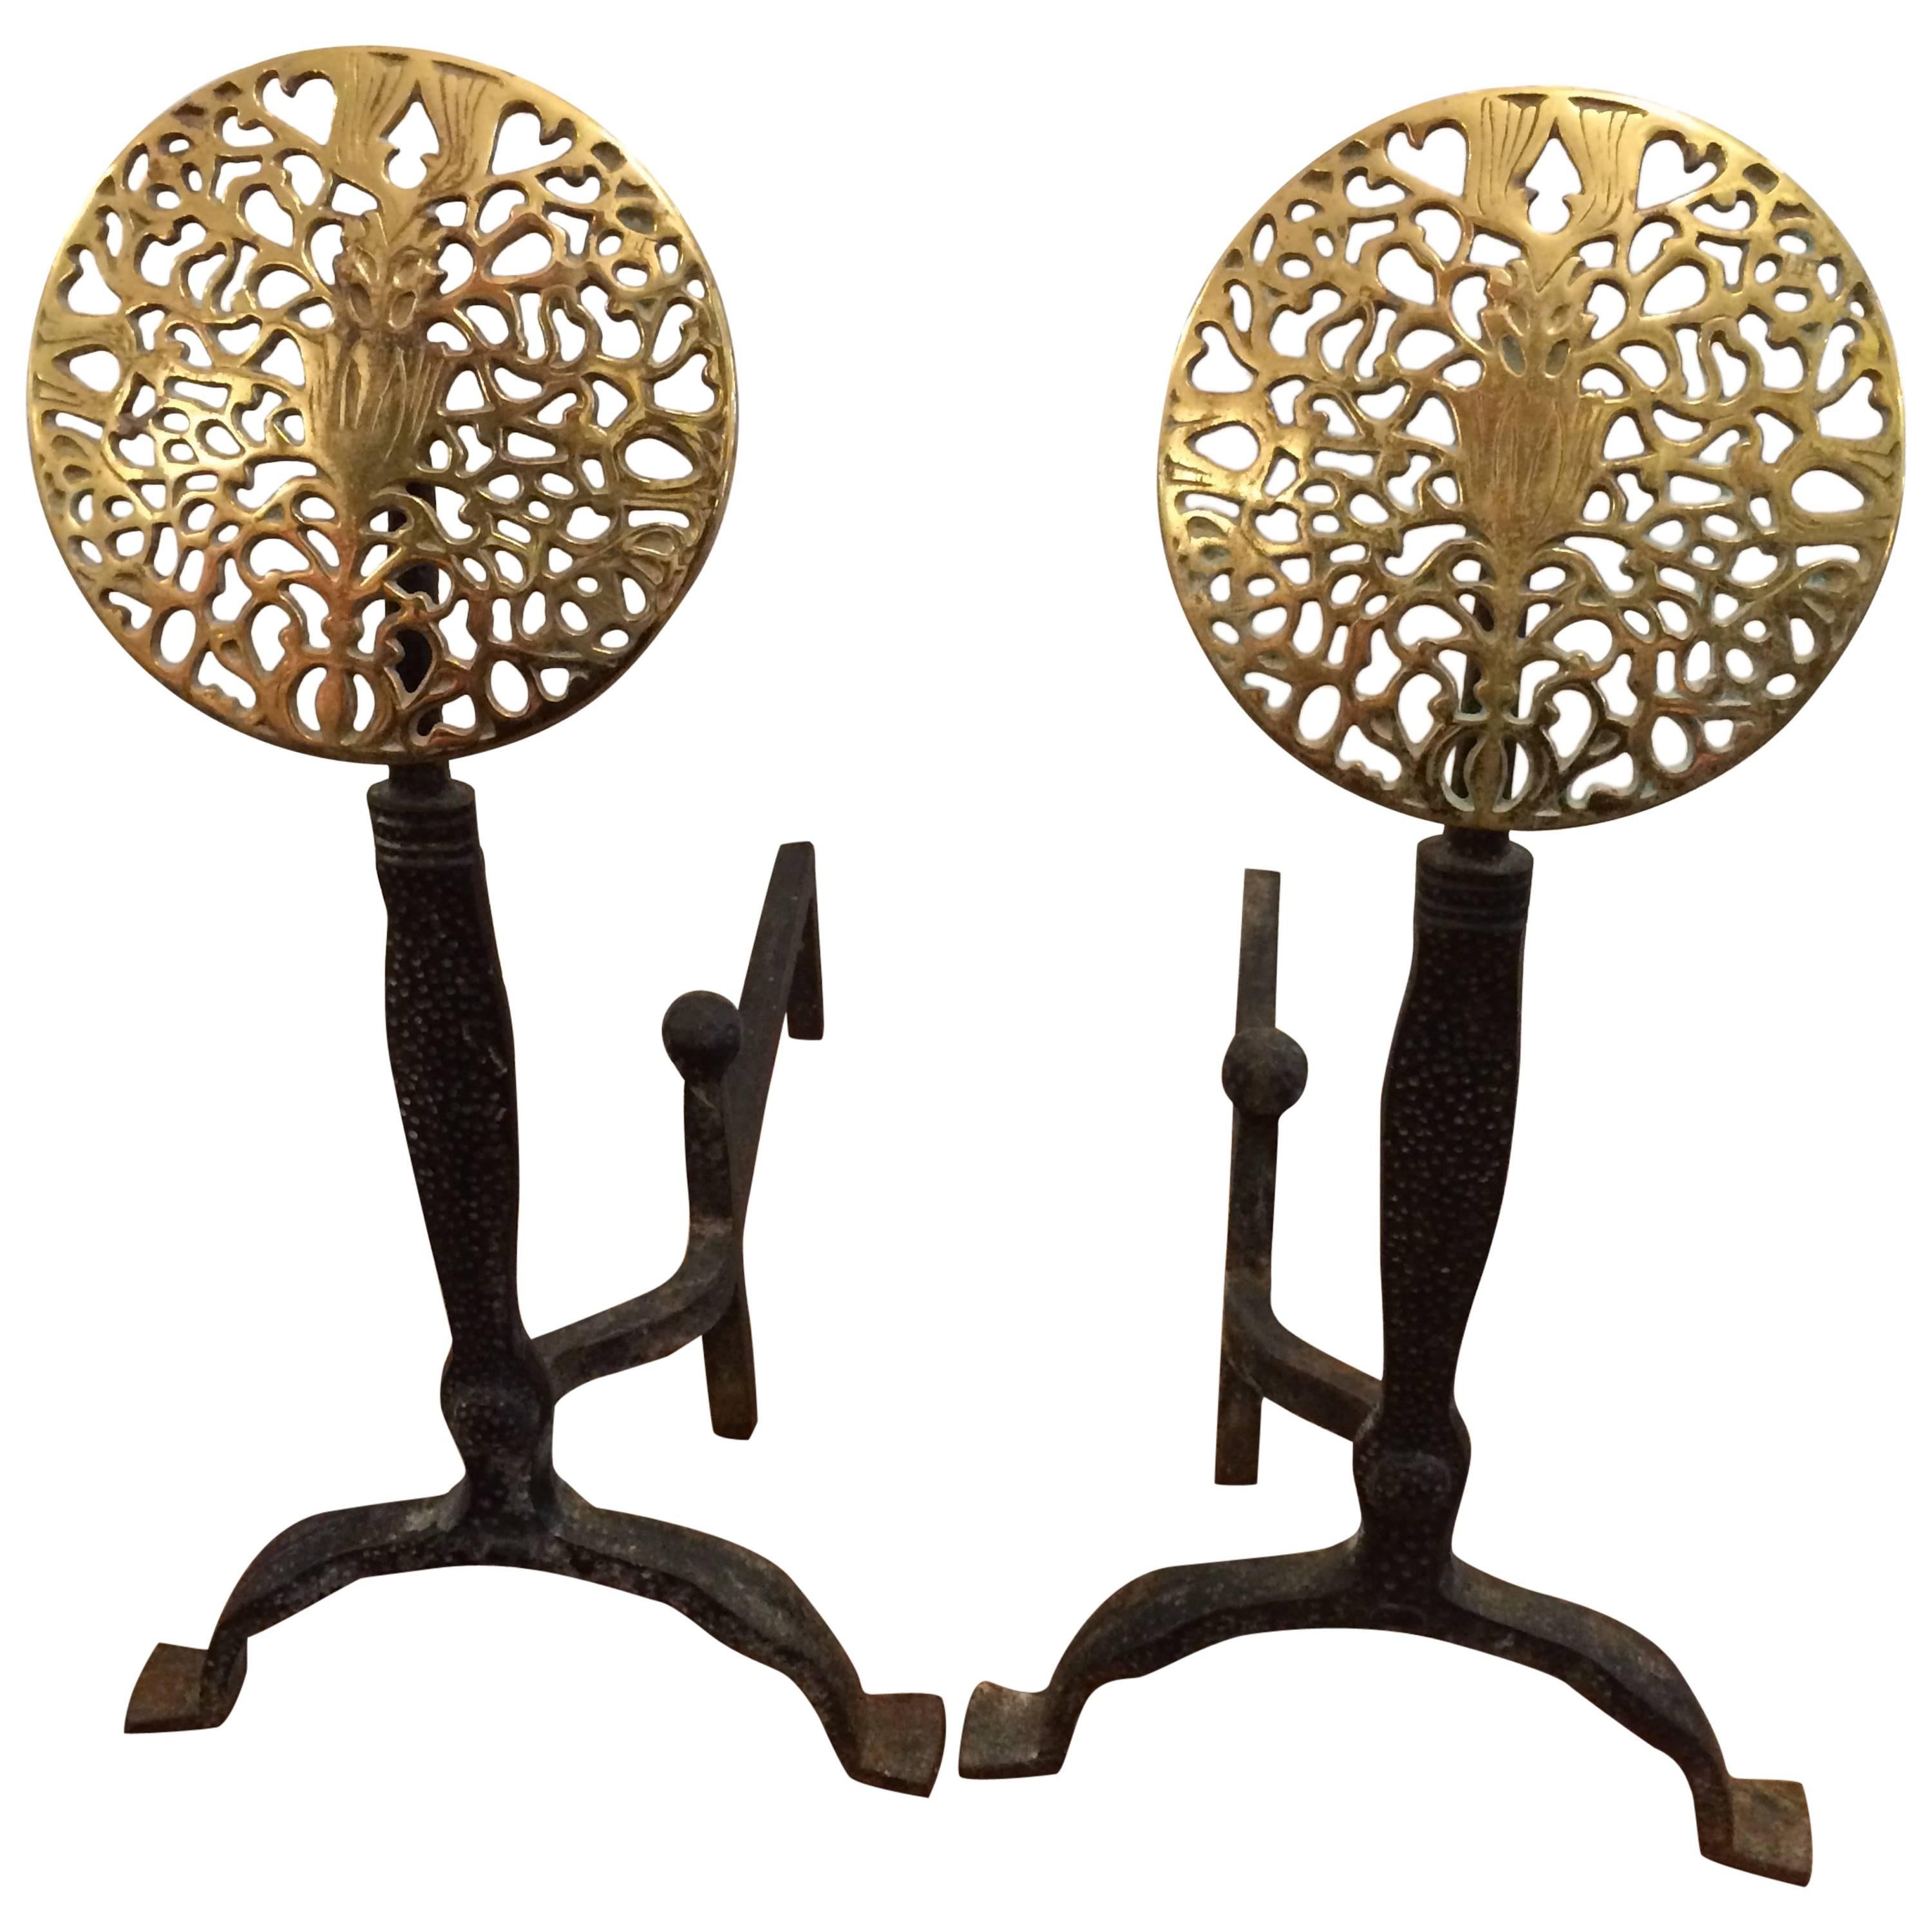 Pair of Stylish Wrought Iron and Brass Medallion Andirons